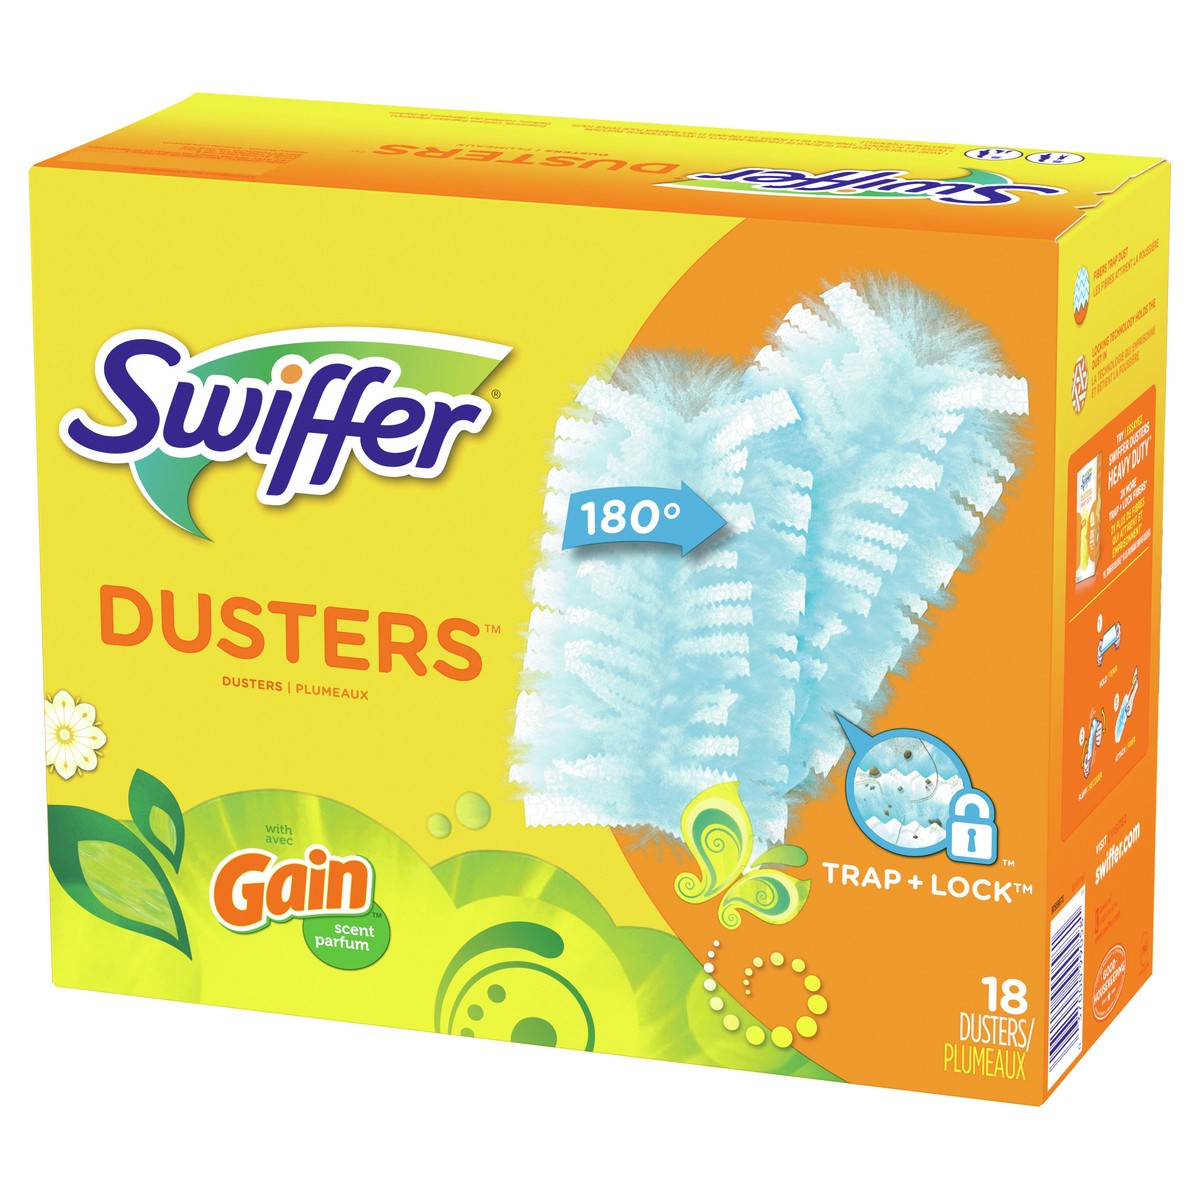 slide 3 of 5, Swiffer Gain Scent Dusters 18 ea, 18 ct